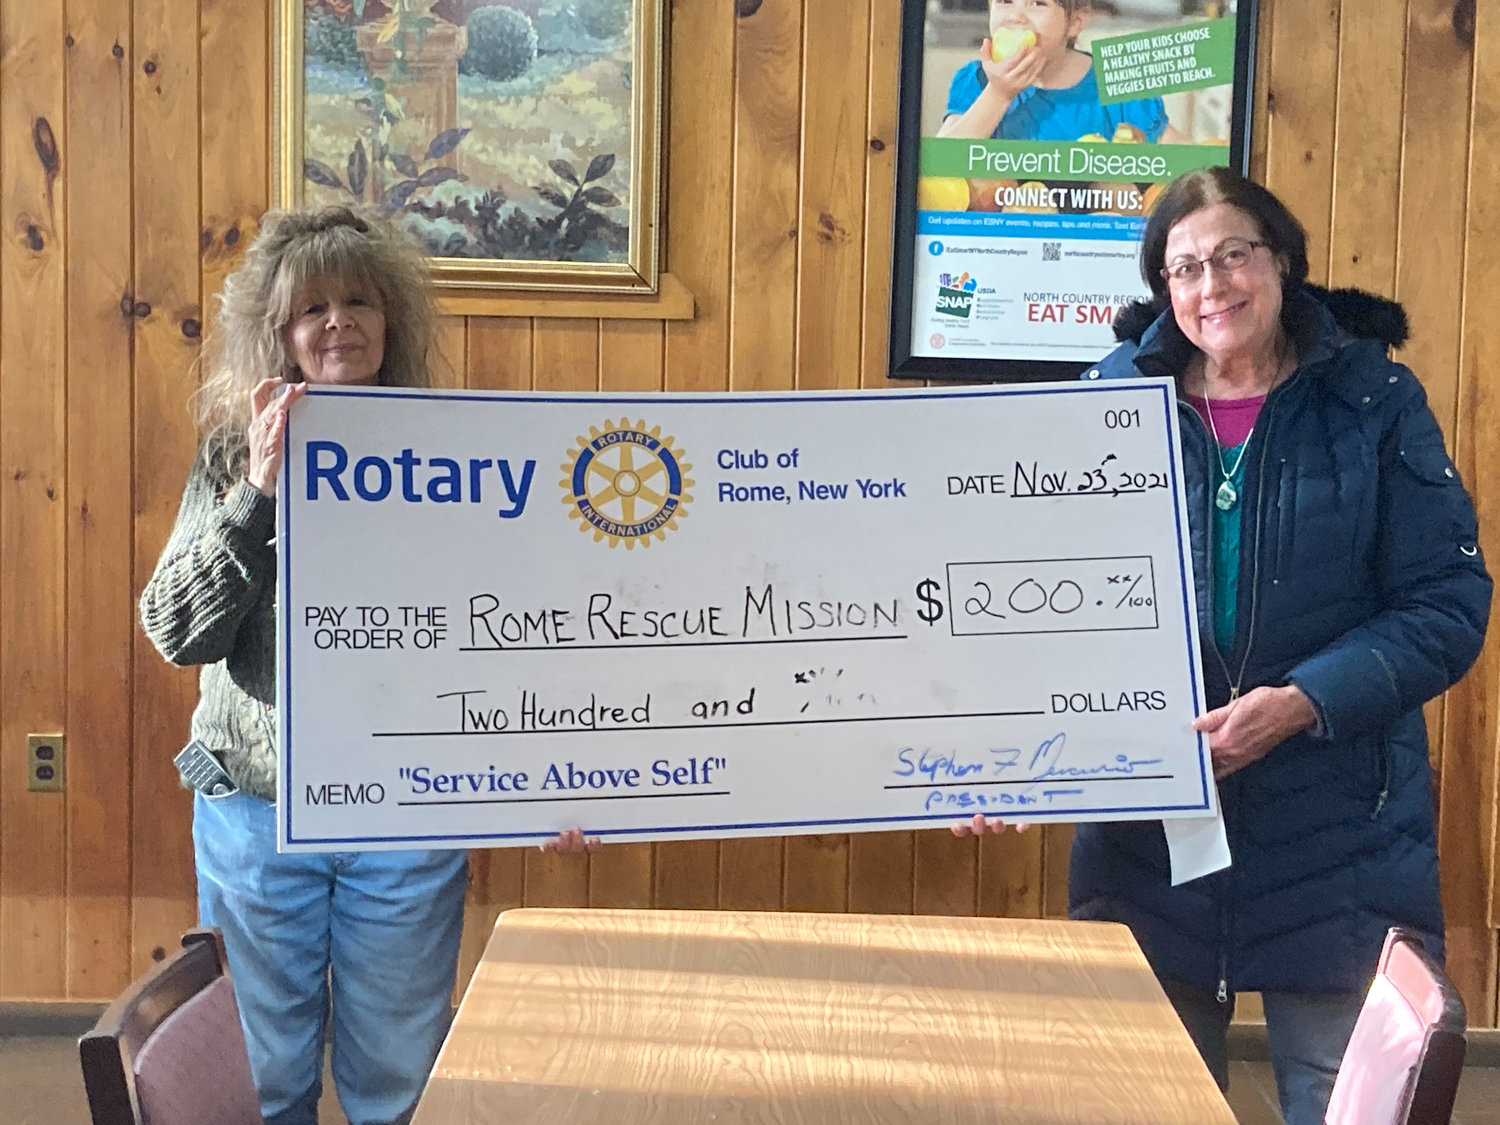 ROTARY SUPPORT — Rome Rotary’s Kris Dombeck, right, presents a cash donation to Lisa Patierno of the Rome Rescue Mission in support of the agency’s Annual Thanksgiving Meal Program. In addition to the cash donation, Rome’s Rotarians donated 27 turkeys and more than 150 pounds of other foods and deserts. During December, the Rome Rotary Club will be donating new Blankets for Veterans in Need. Kris-Tech Wire has donated of $250 toward the program. Rotary is asking the community to join the effort by dropping off new blankets at  1605 N. George St. Donations can also be sent to Rotary Club of Rome, Post Office Box 655, Rome, New York, 13442-065. (Photo submitted)